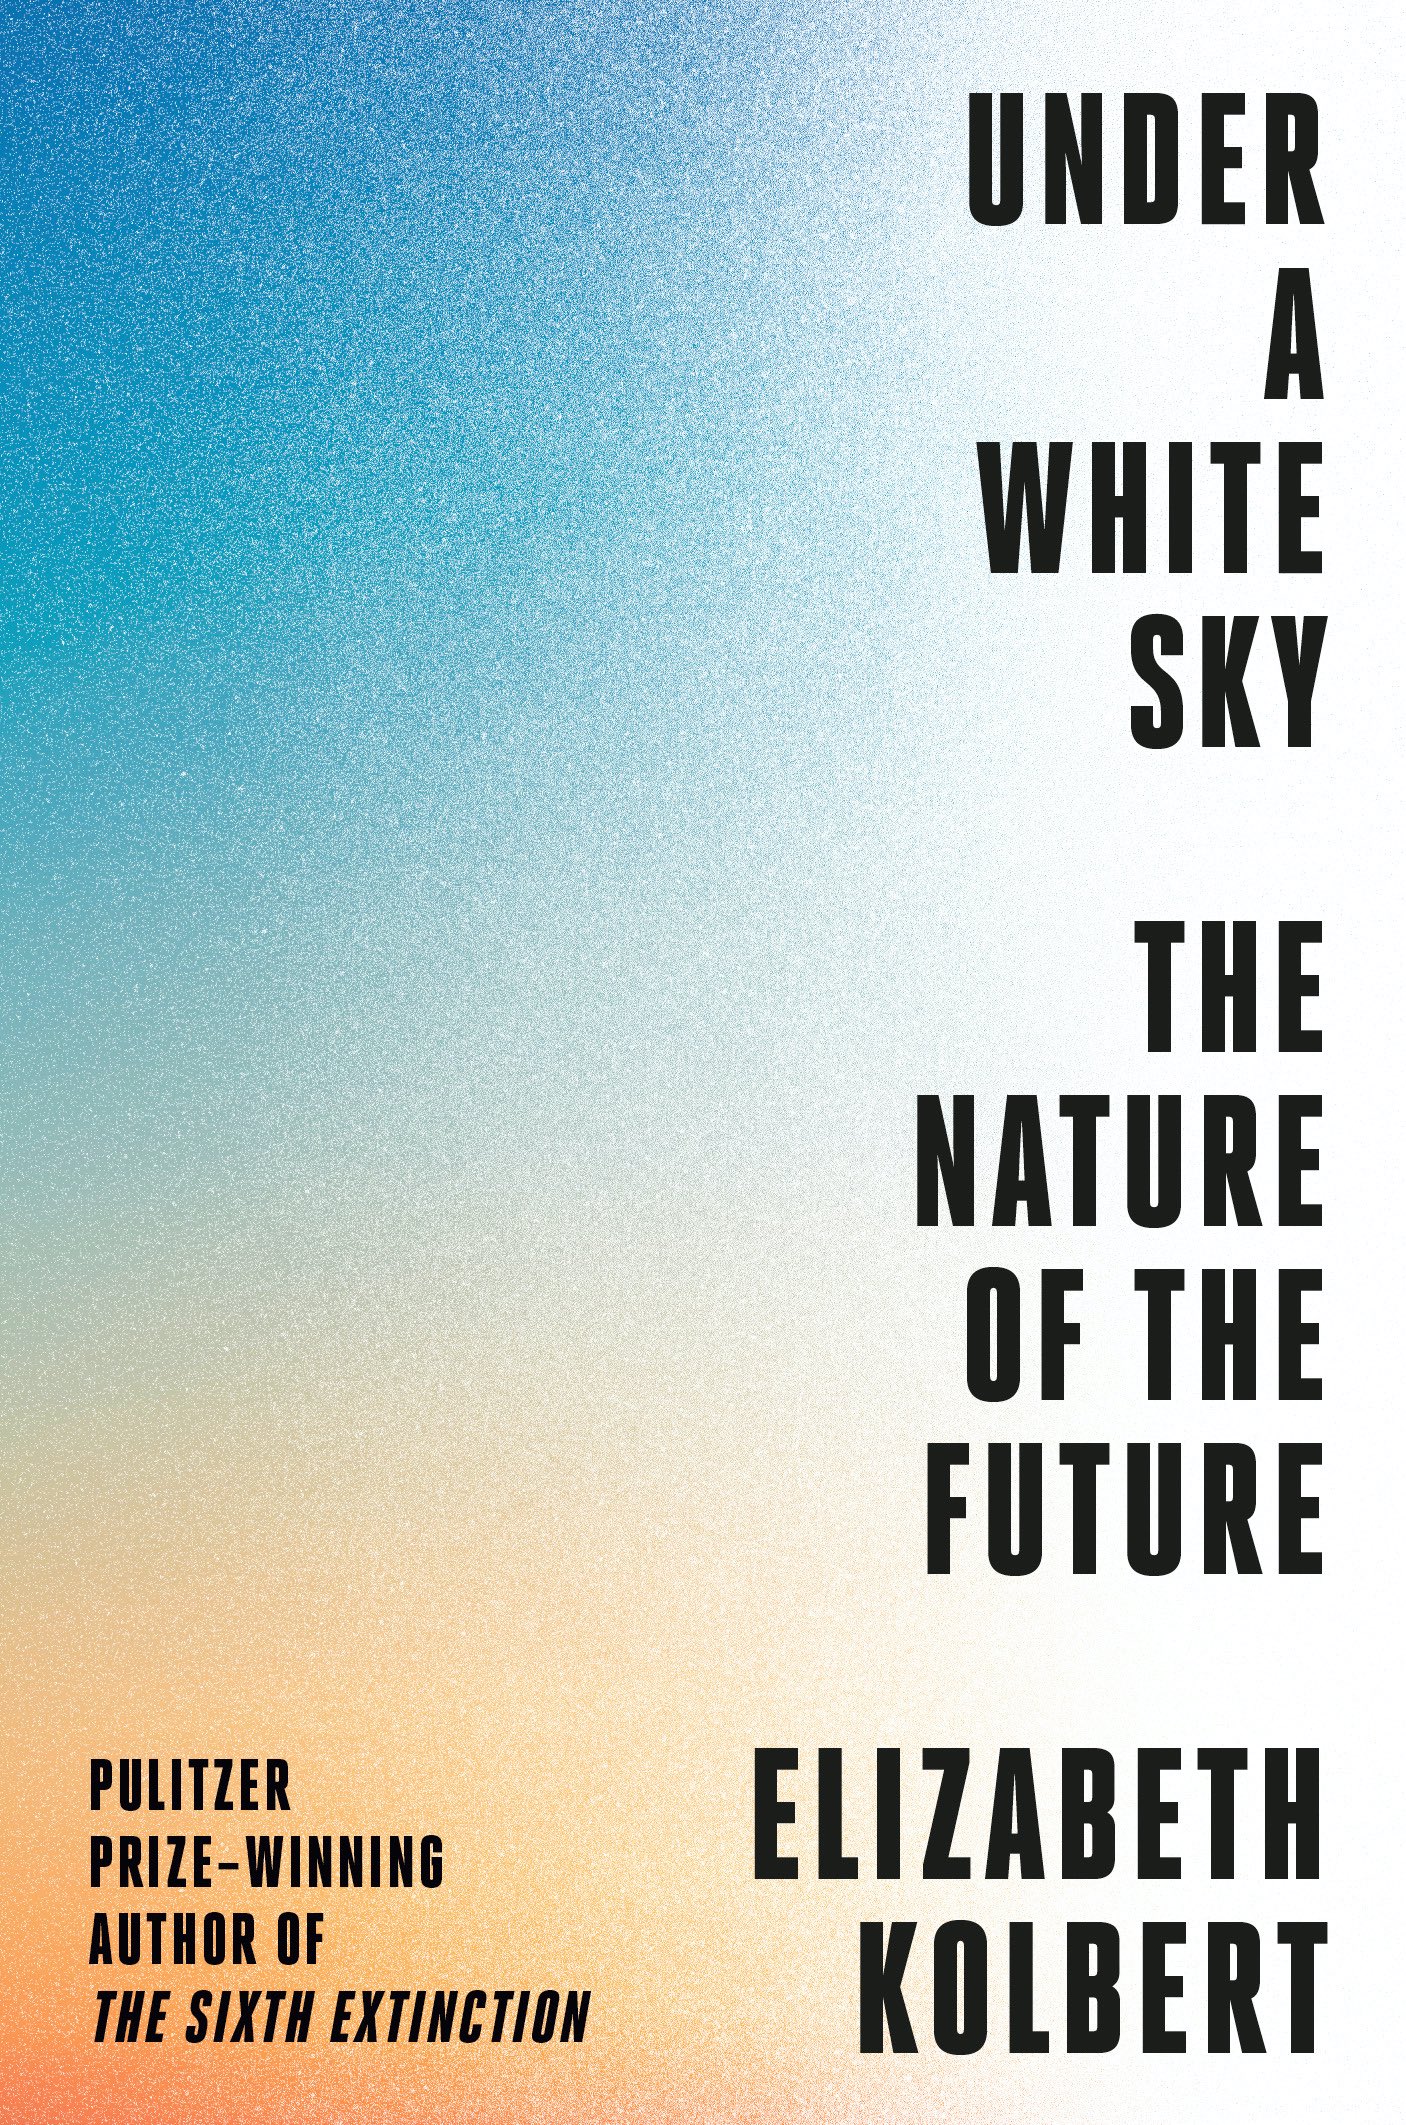 image of book cover for Under a White Sky